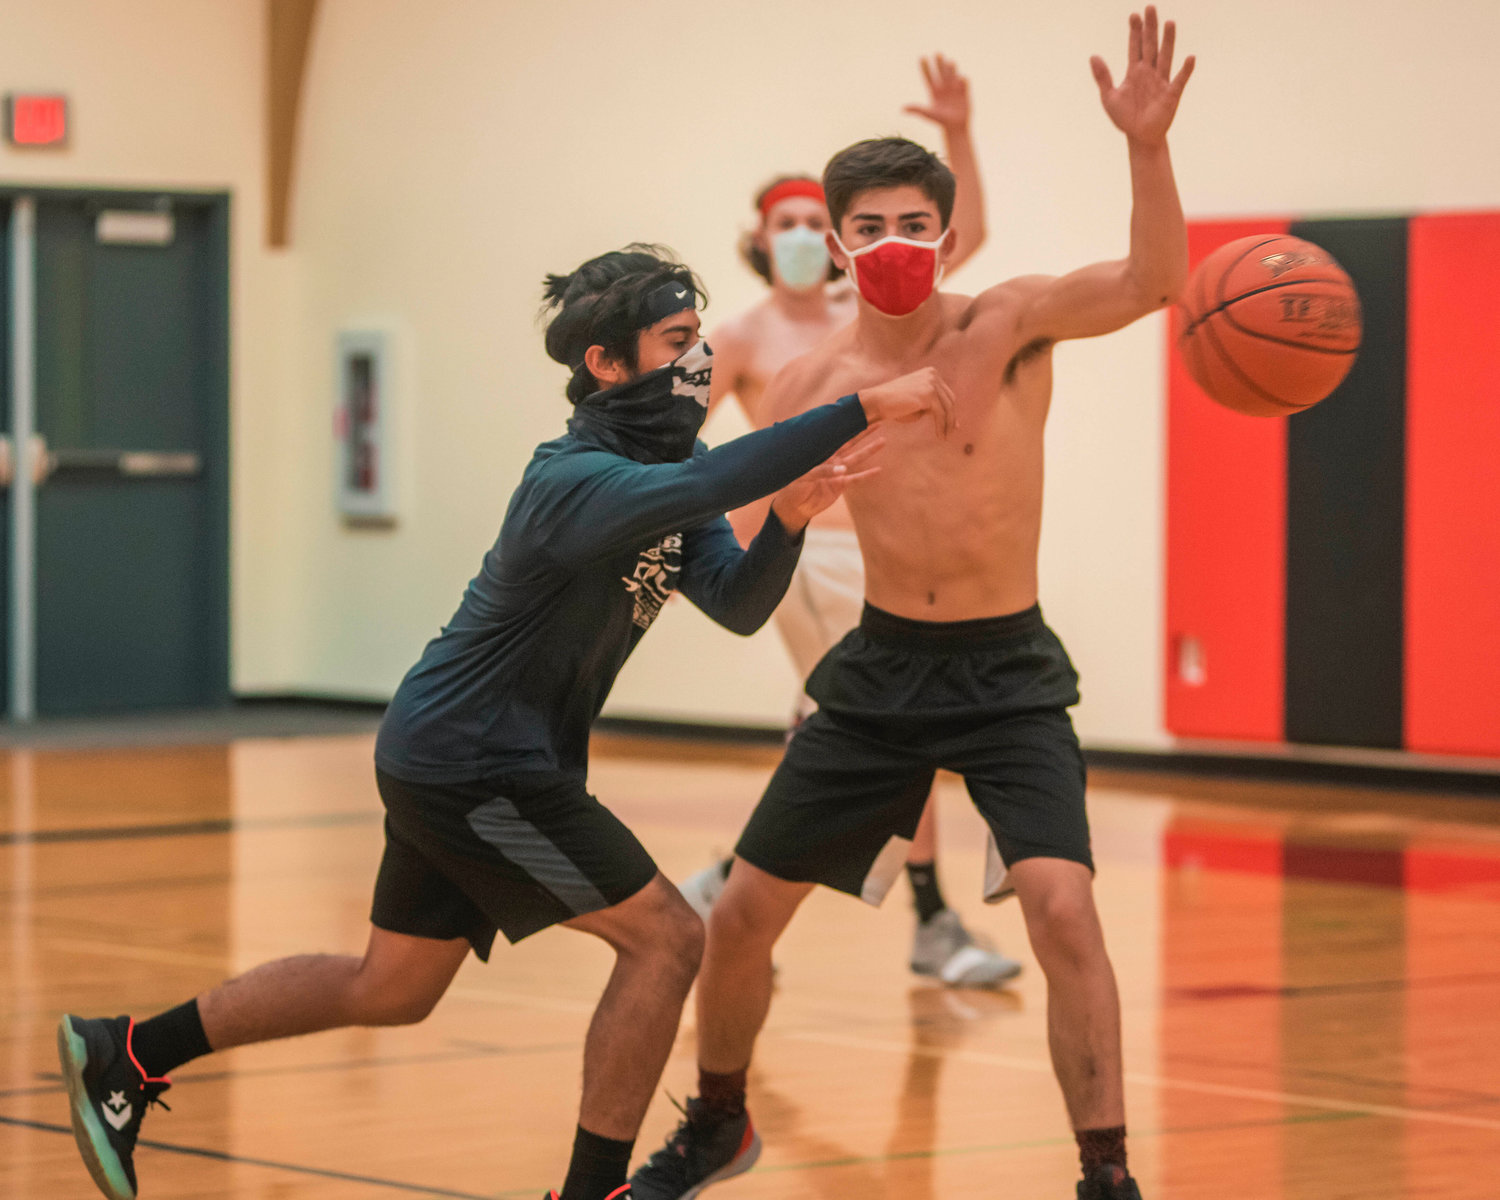 A player sports a neck gaiter as he passes the basketball during practice at Mossyrock High School on Sunday.